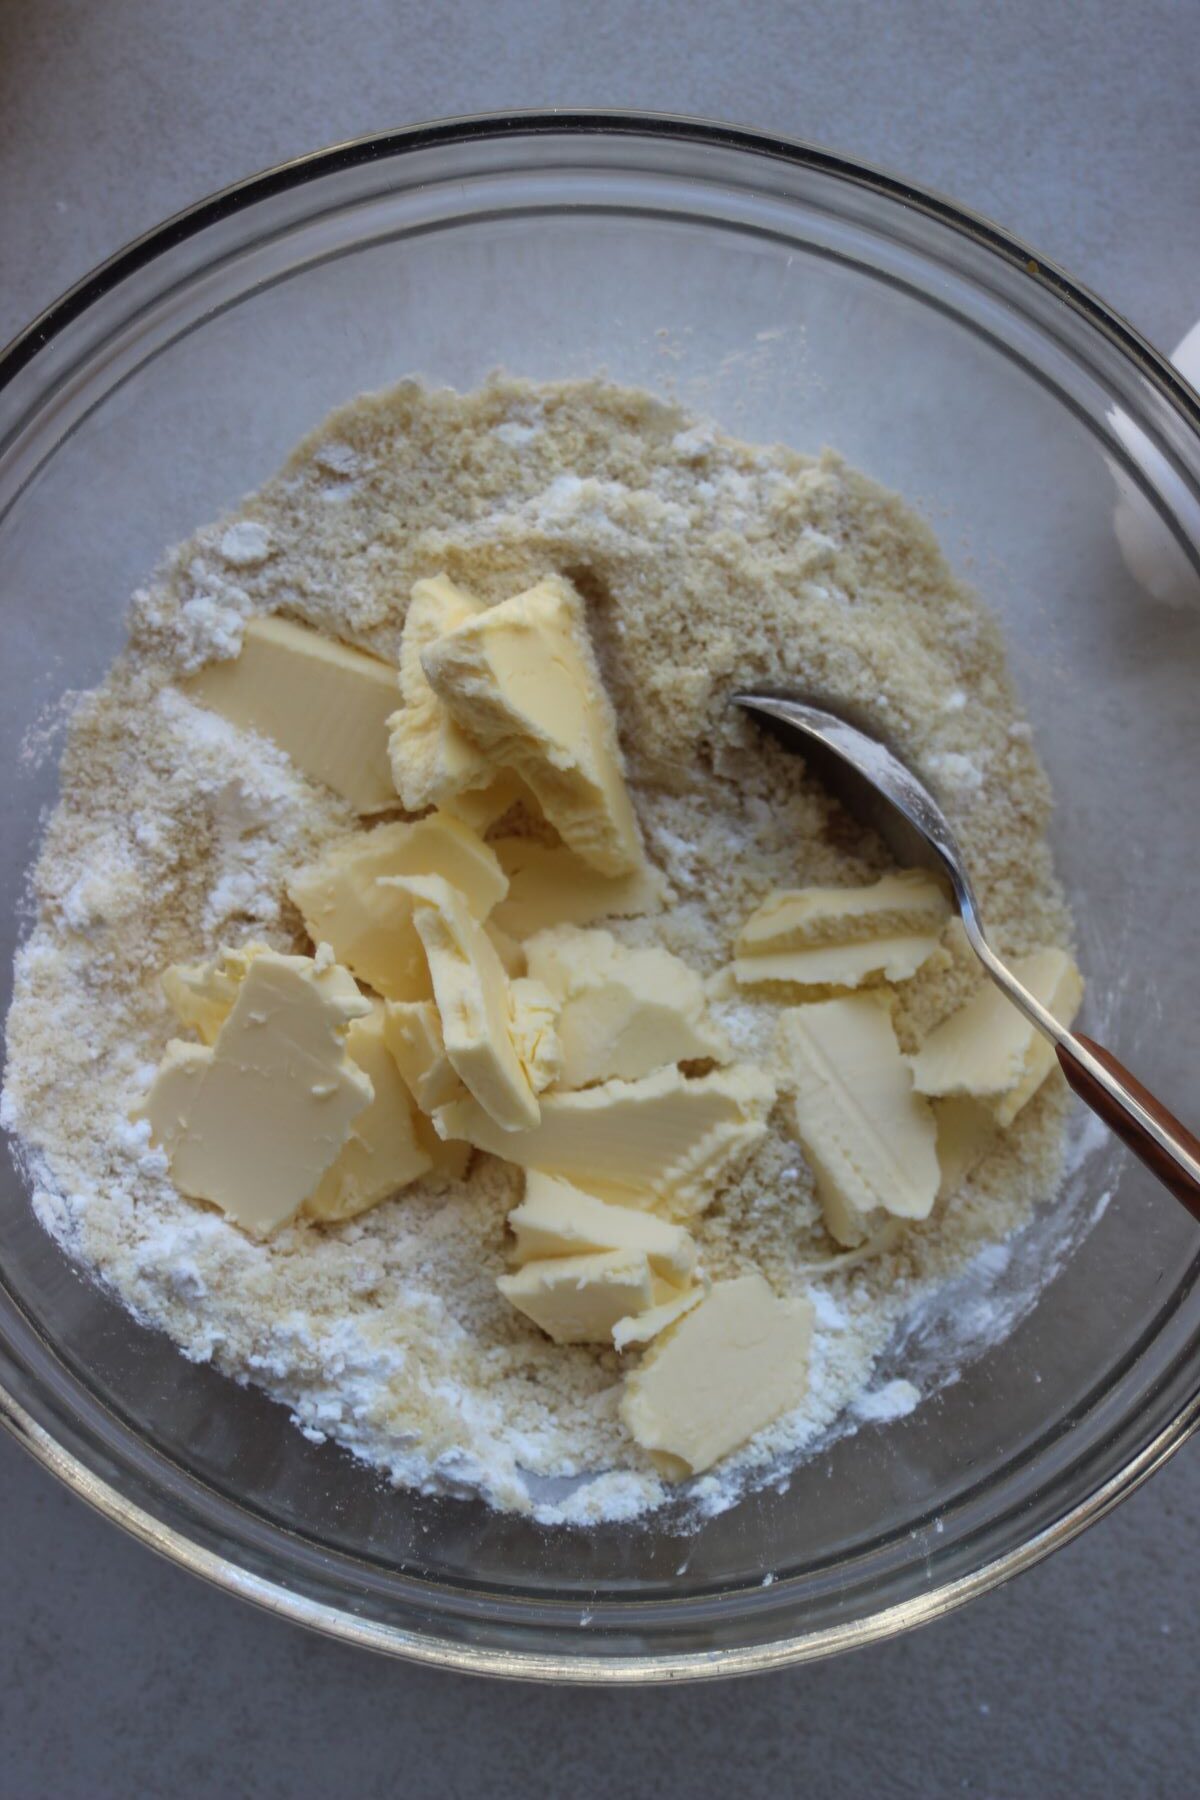 Glass bowl with dry ingredients and chunks of butter.